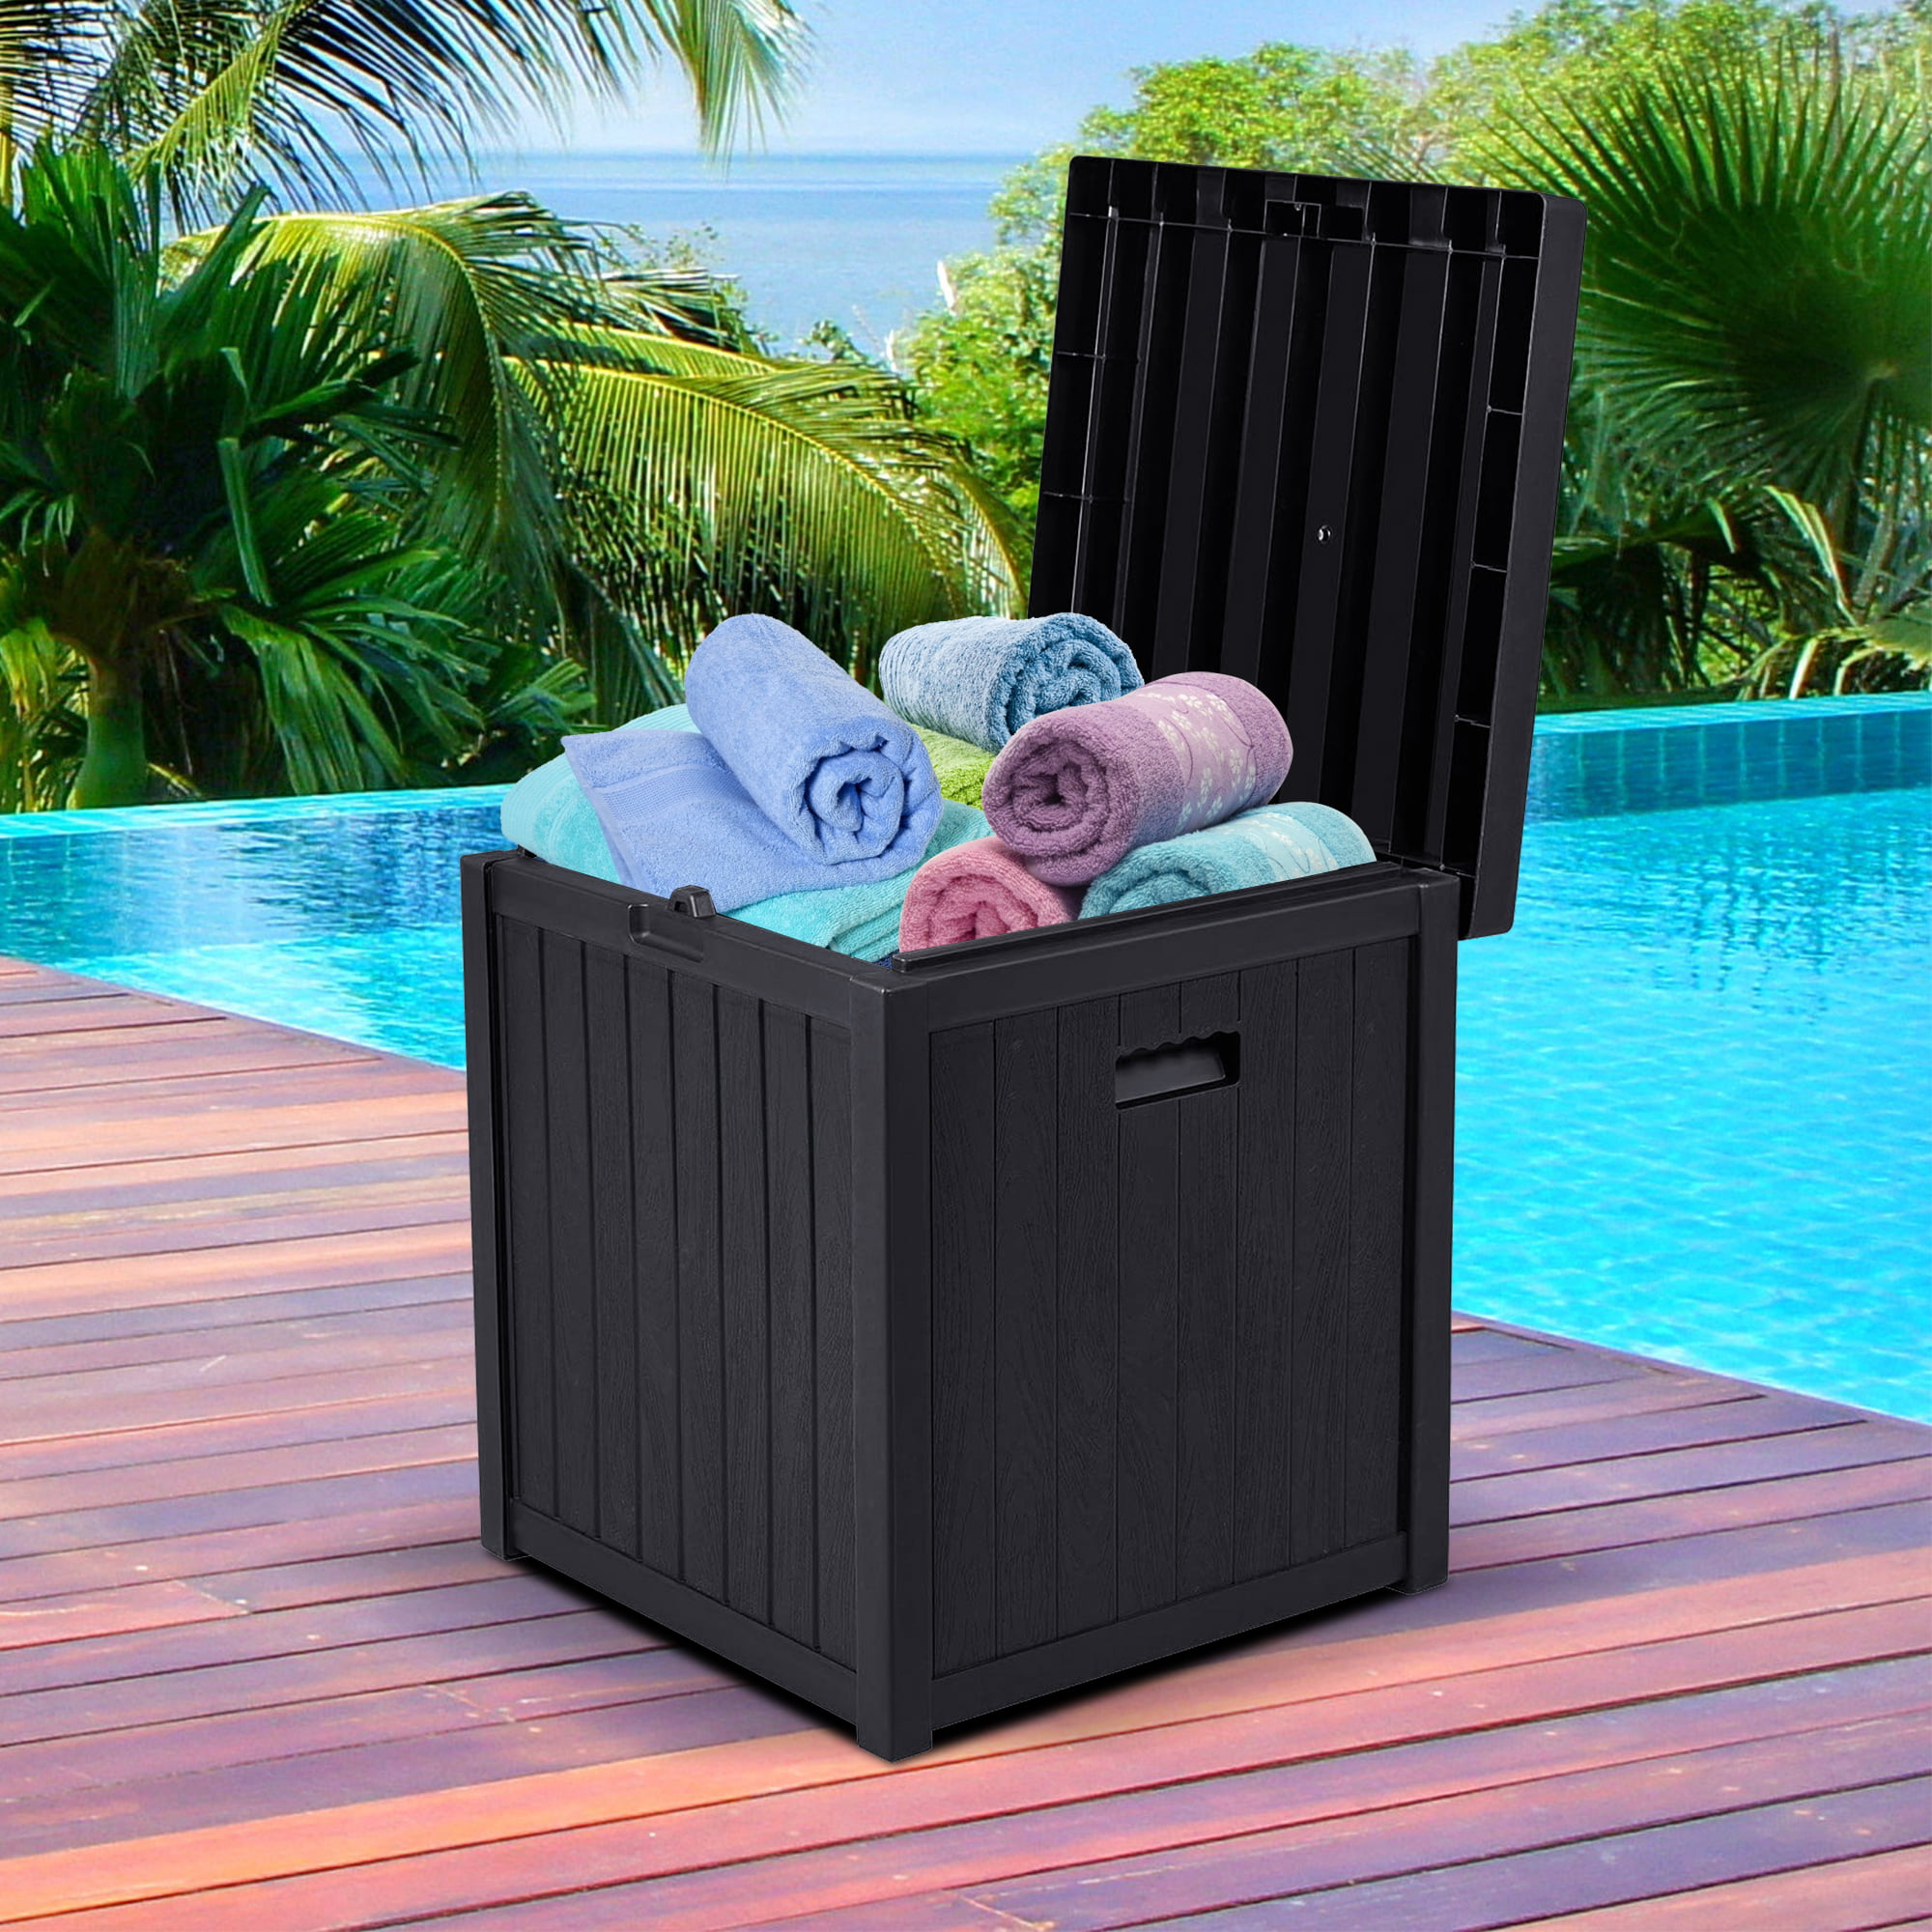 Skiway 120 Gallon Outdoor Patio Wicker Large Deck Storage Box,Store Cushion Toys and sundry Thing Black 